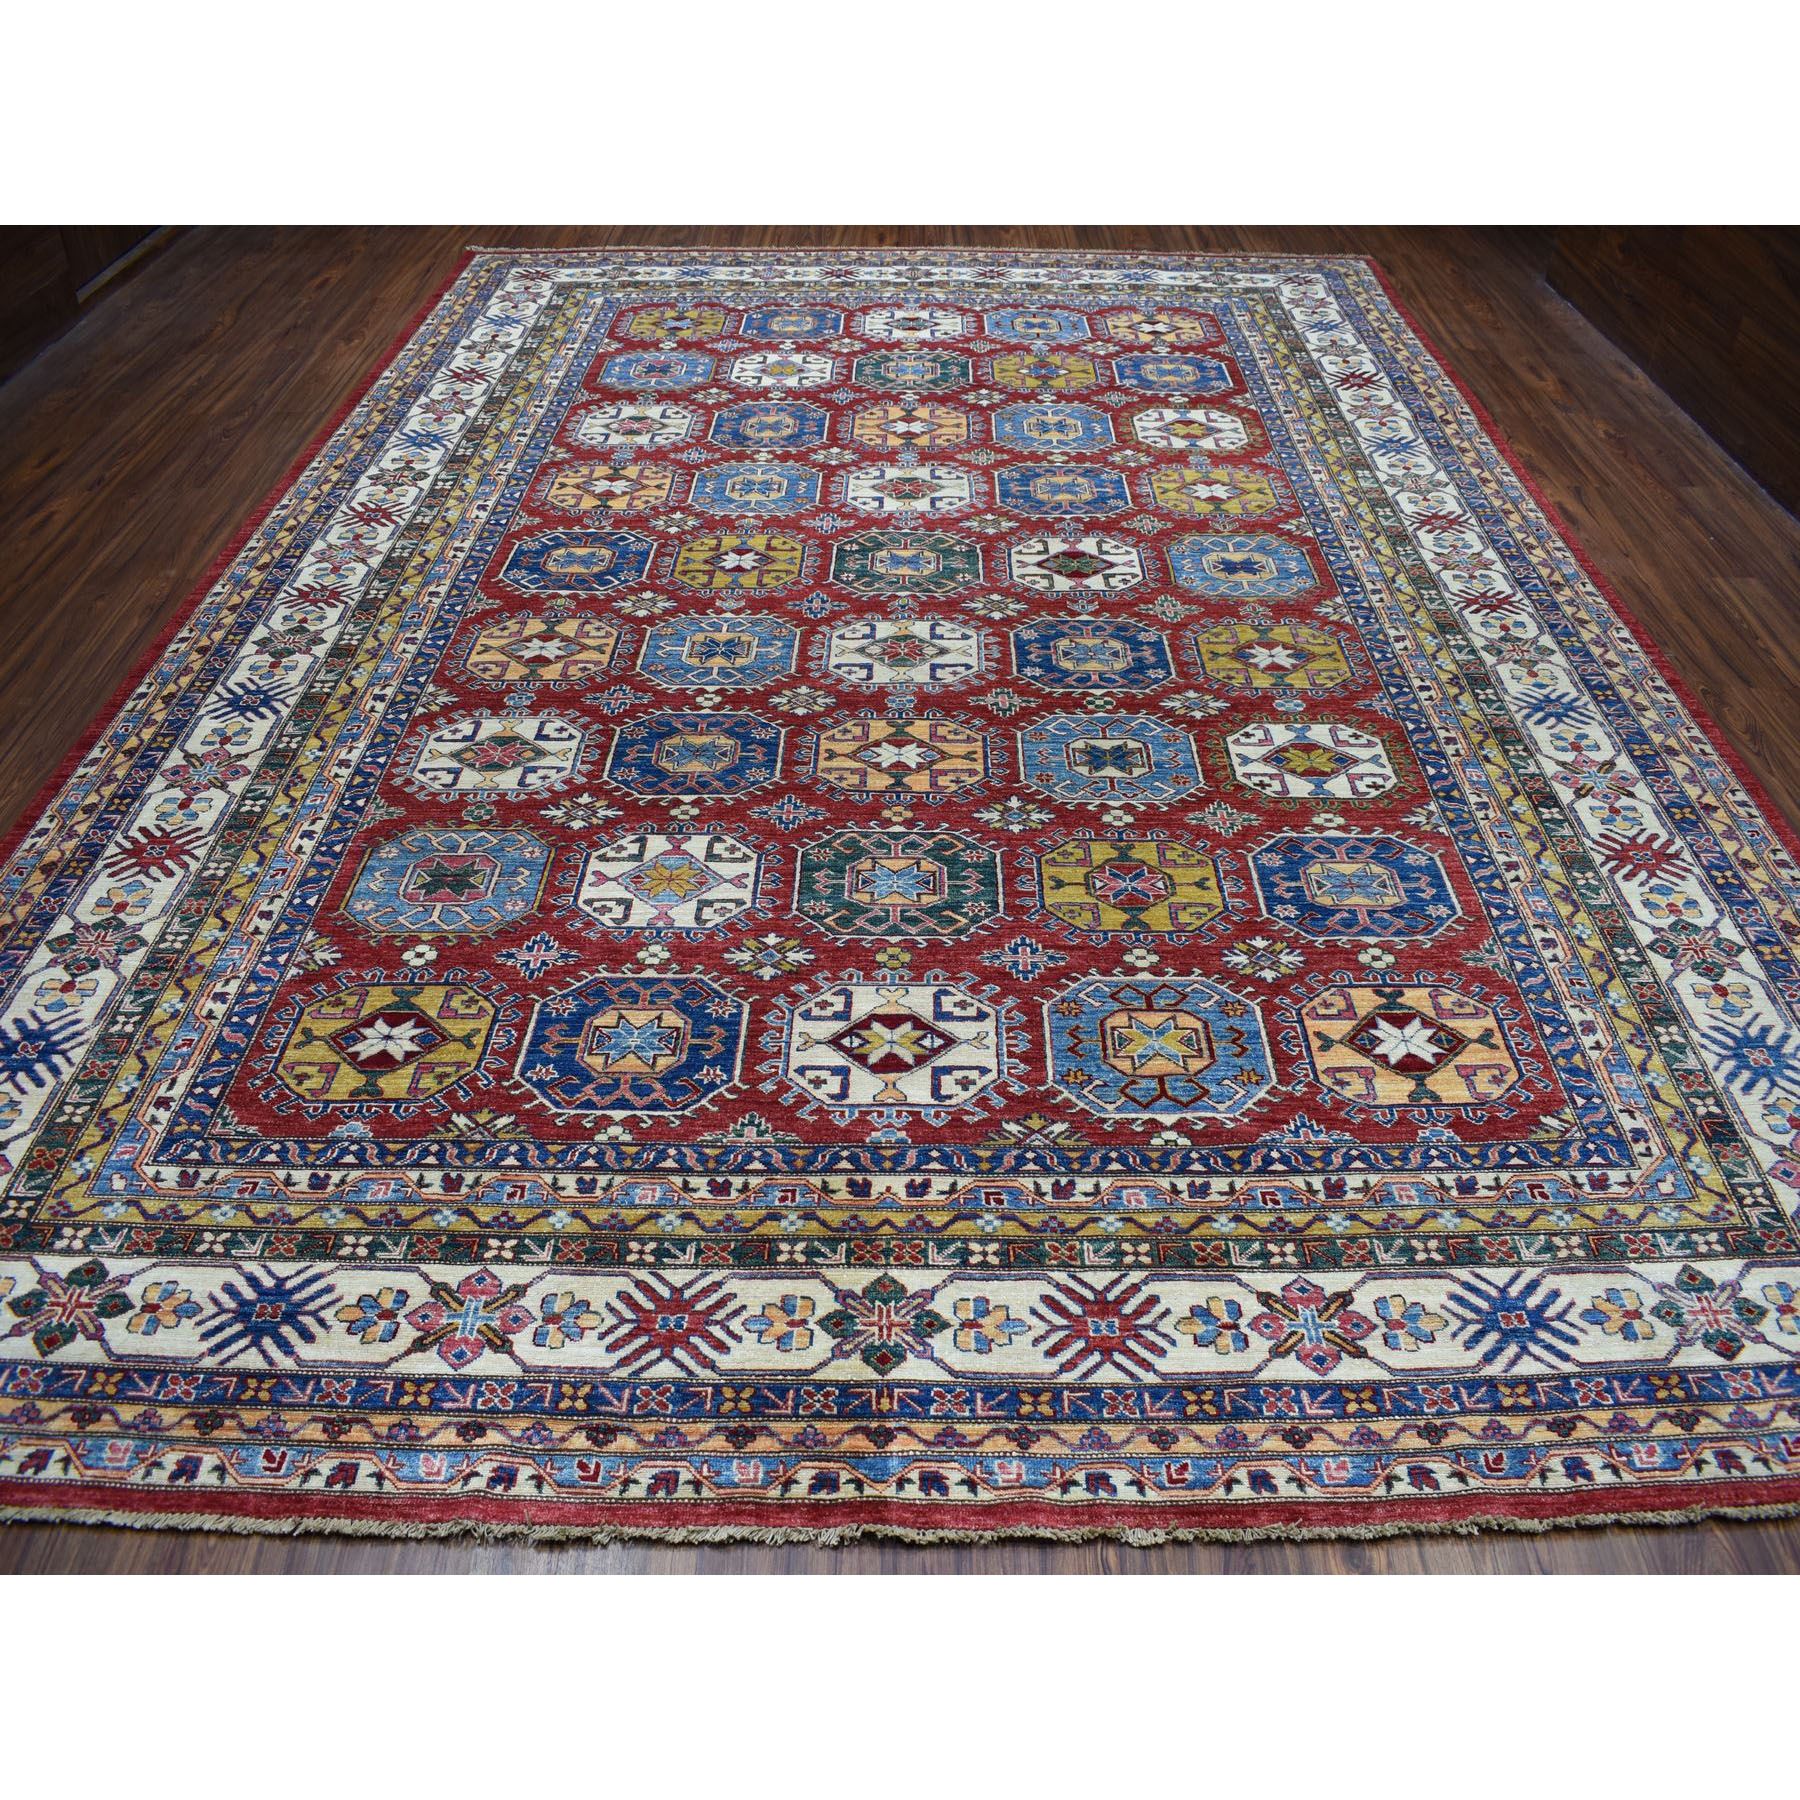  Wool Hand-Knotted Area Rug 10'8